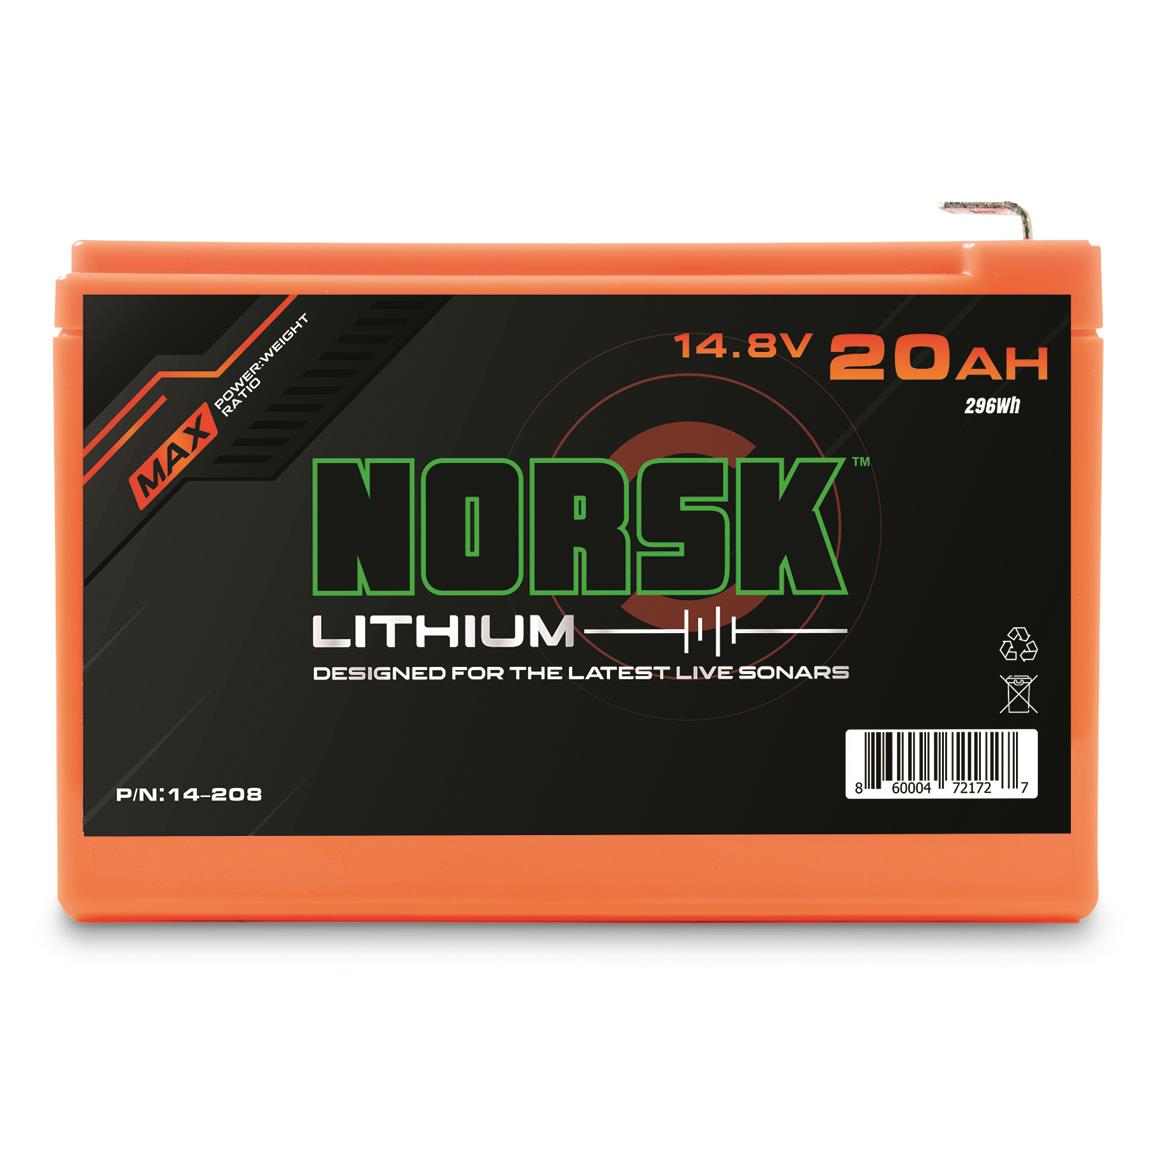 Norsk 20AH Lithium Ion Battery with Charger Kit